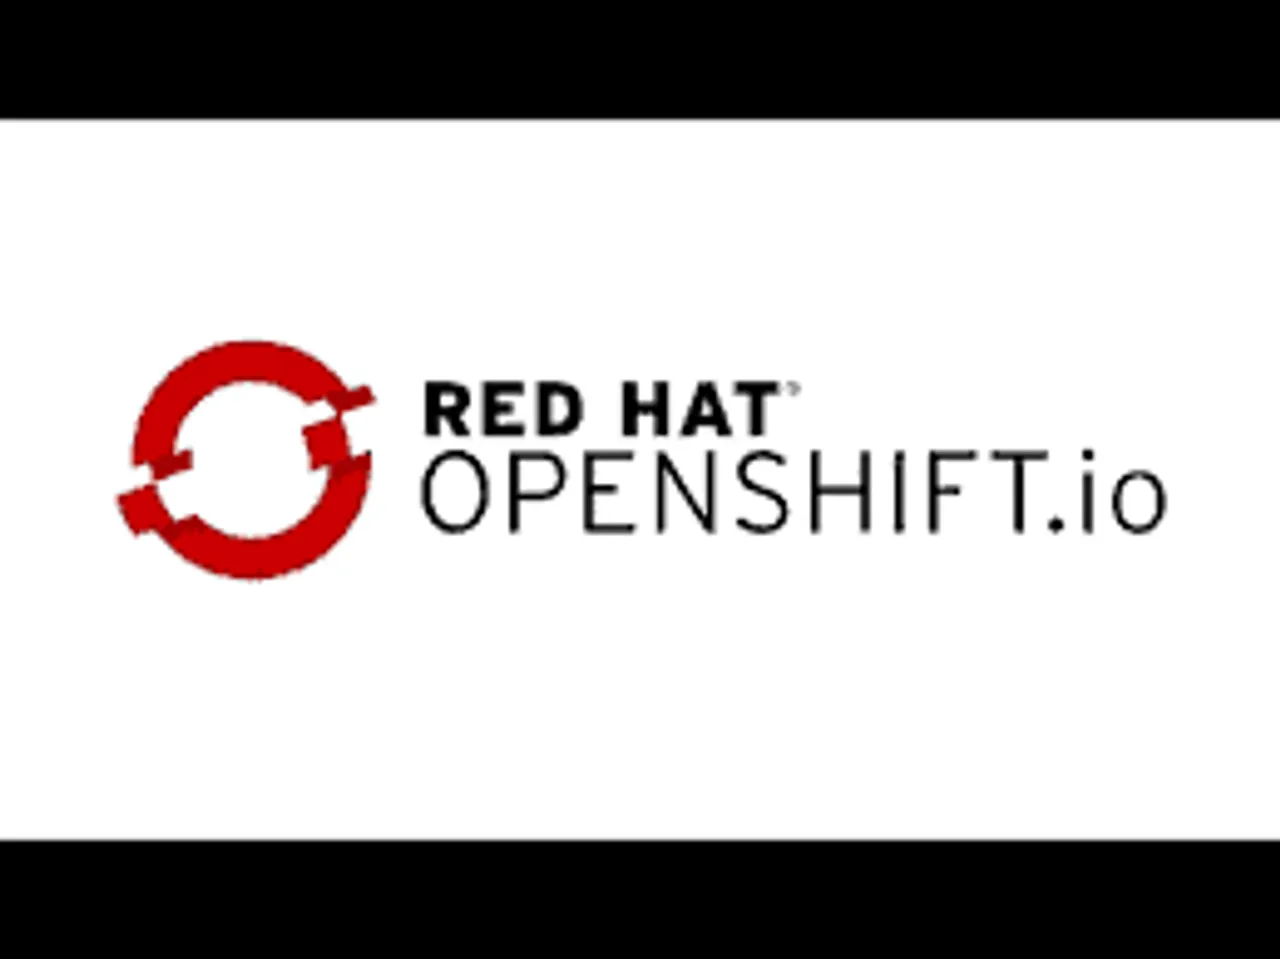 Red Hat Launches End-to-End Cloud-Native Development Environment with OpenShift.io